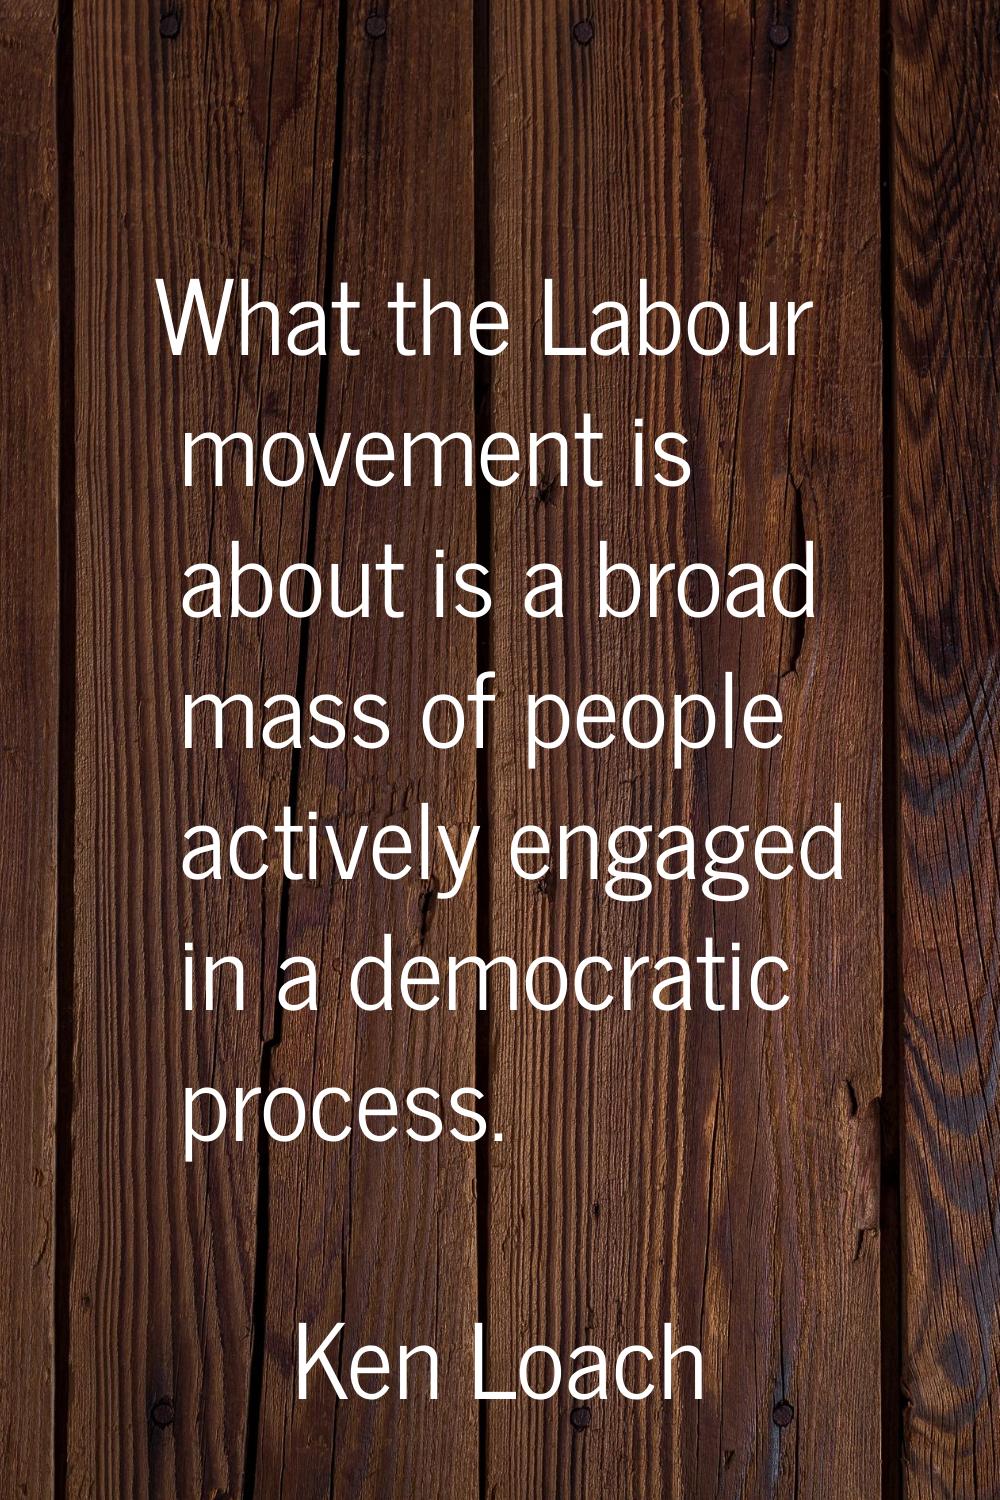 What the Labour movement is about is a broad mass of people actively engaged in a democratic proces